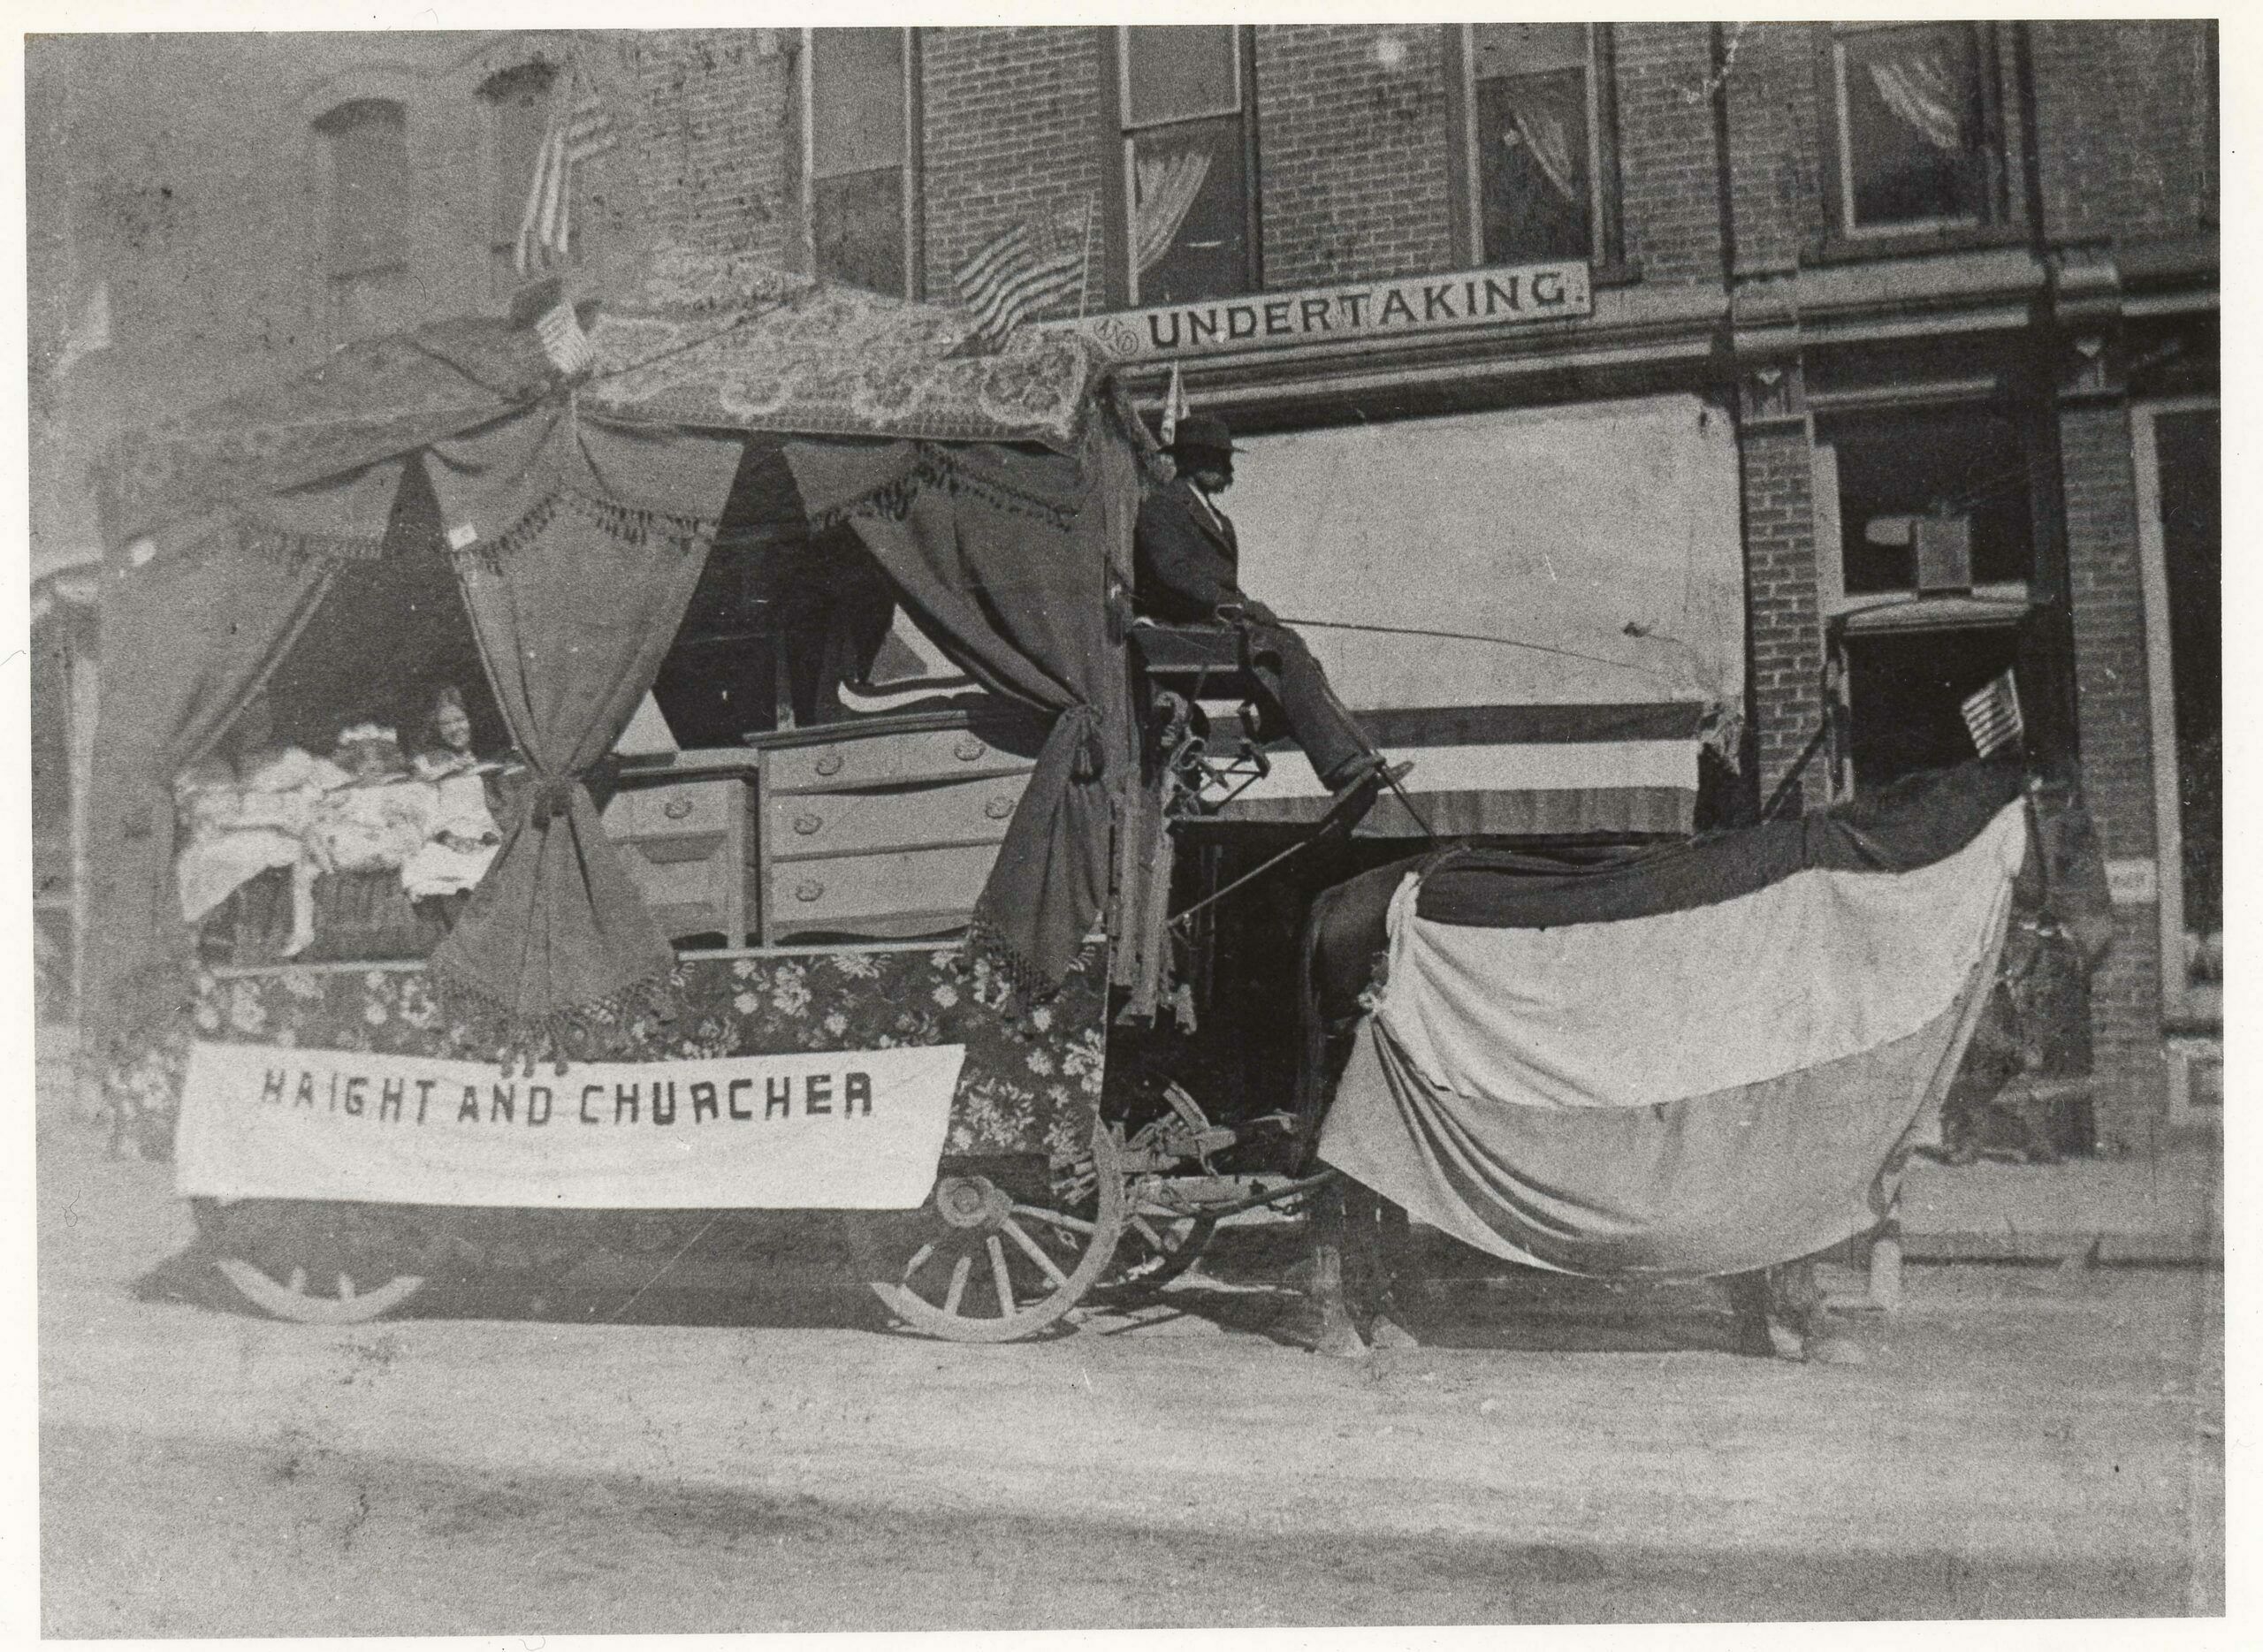 Haight and Churcher Furniture and Undertaking. Frank Churcher is driving.